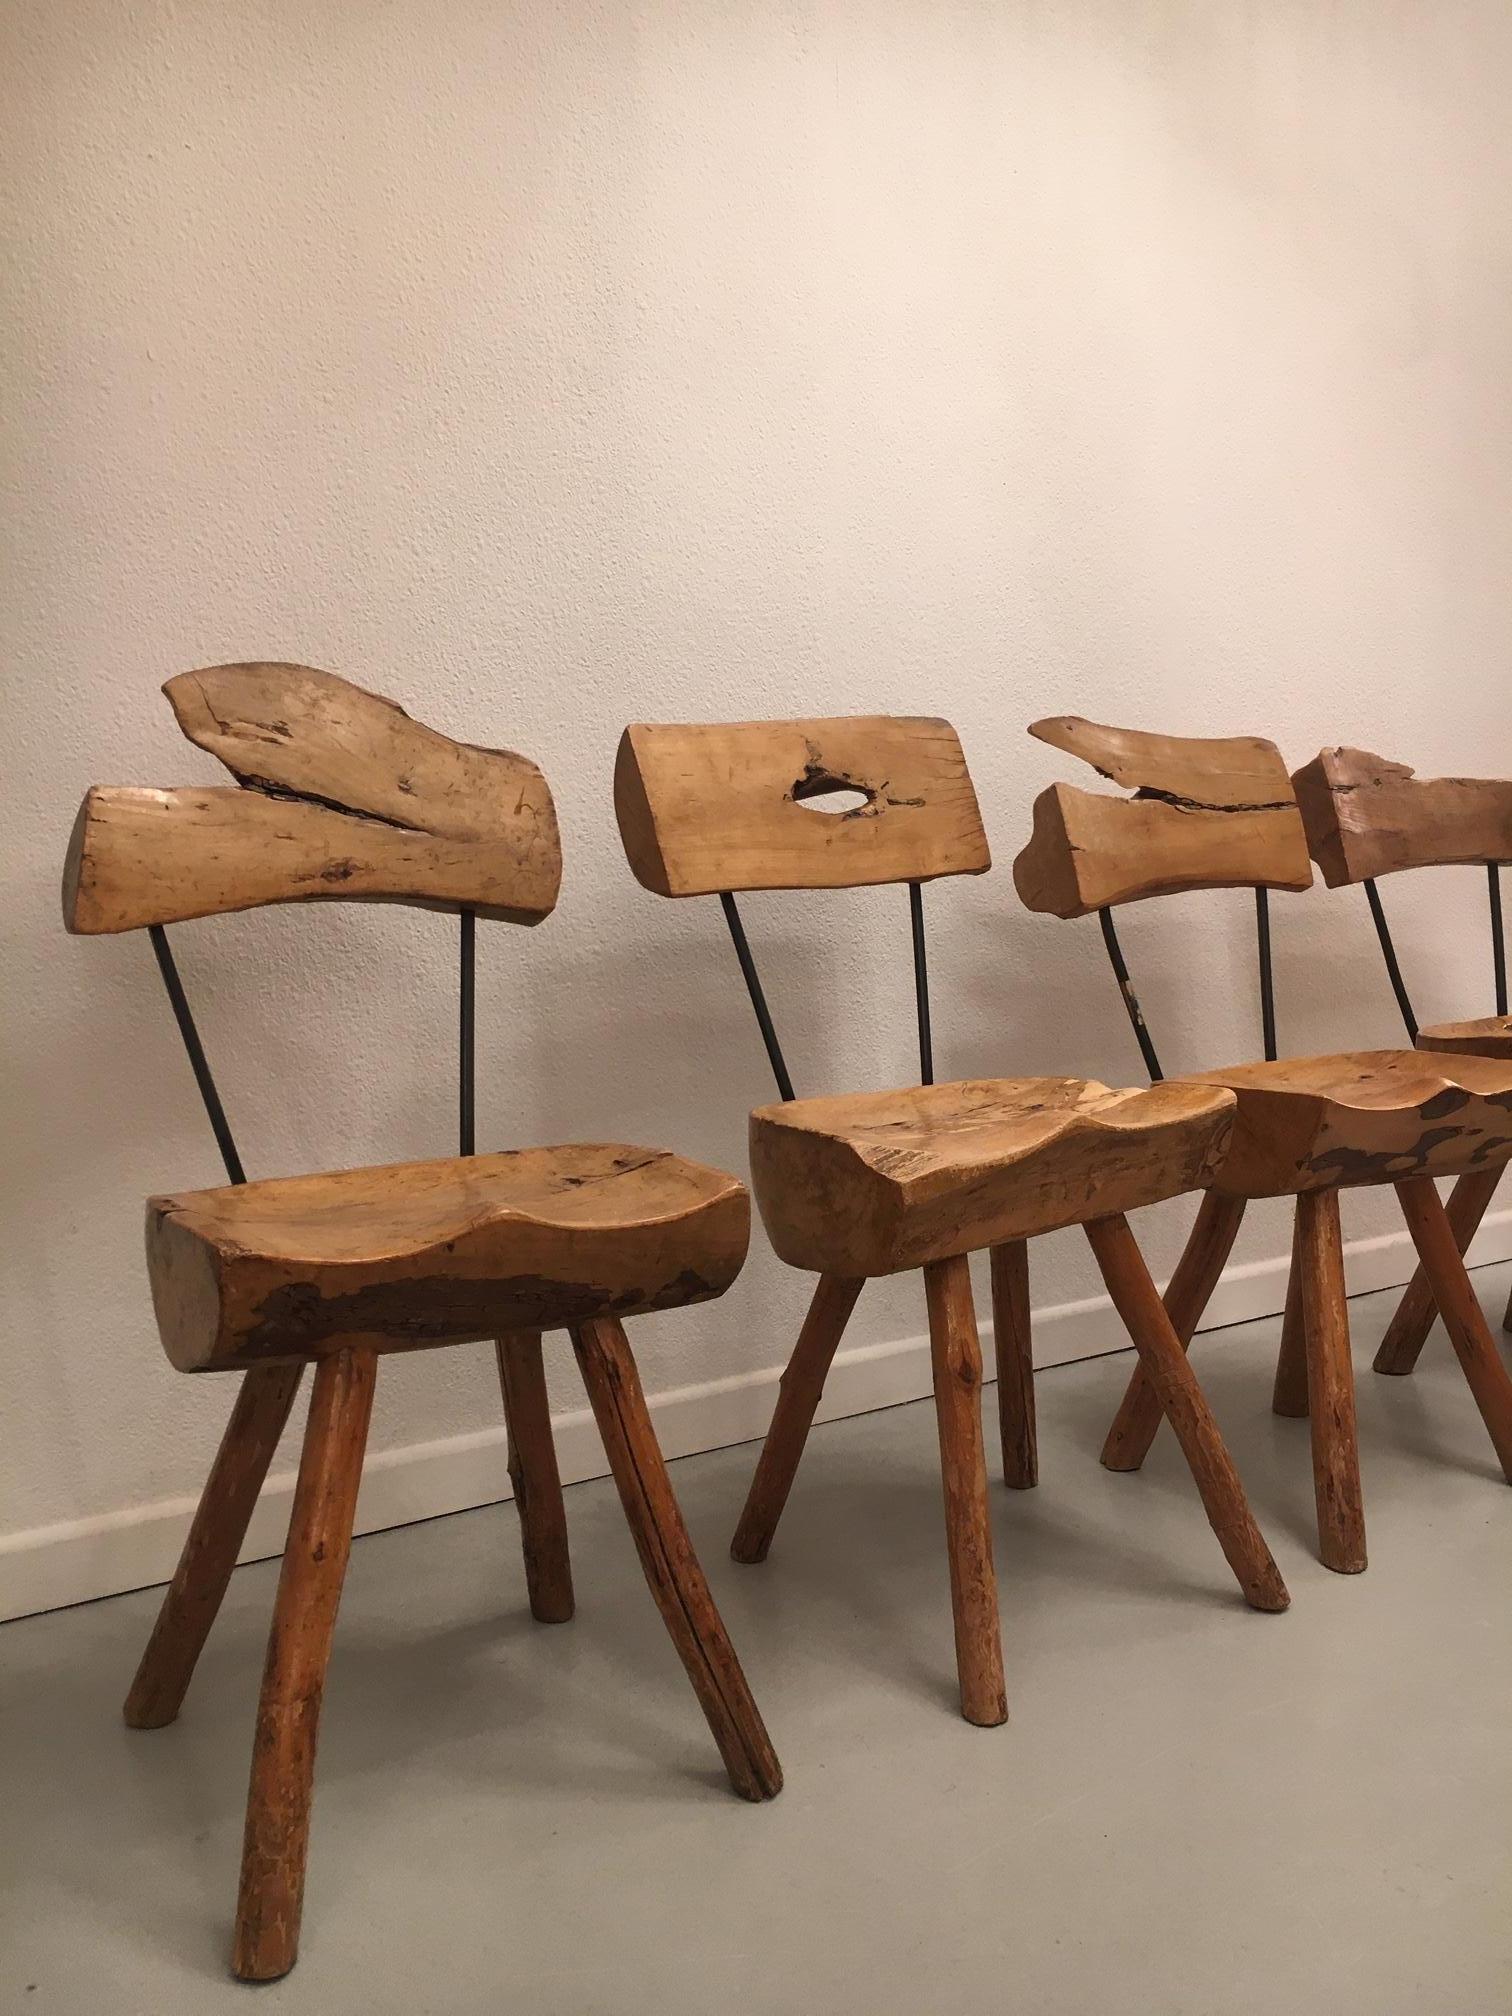 French Set of 5 Solid Olive Wood Brutalist Rustic Dining Chairs, circa 1950s